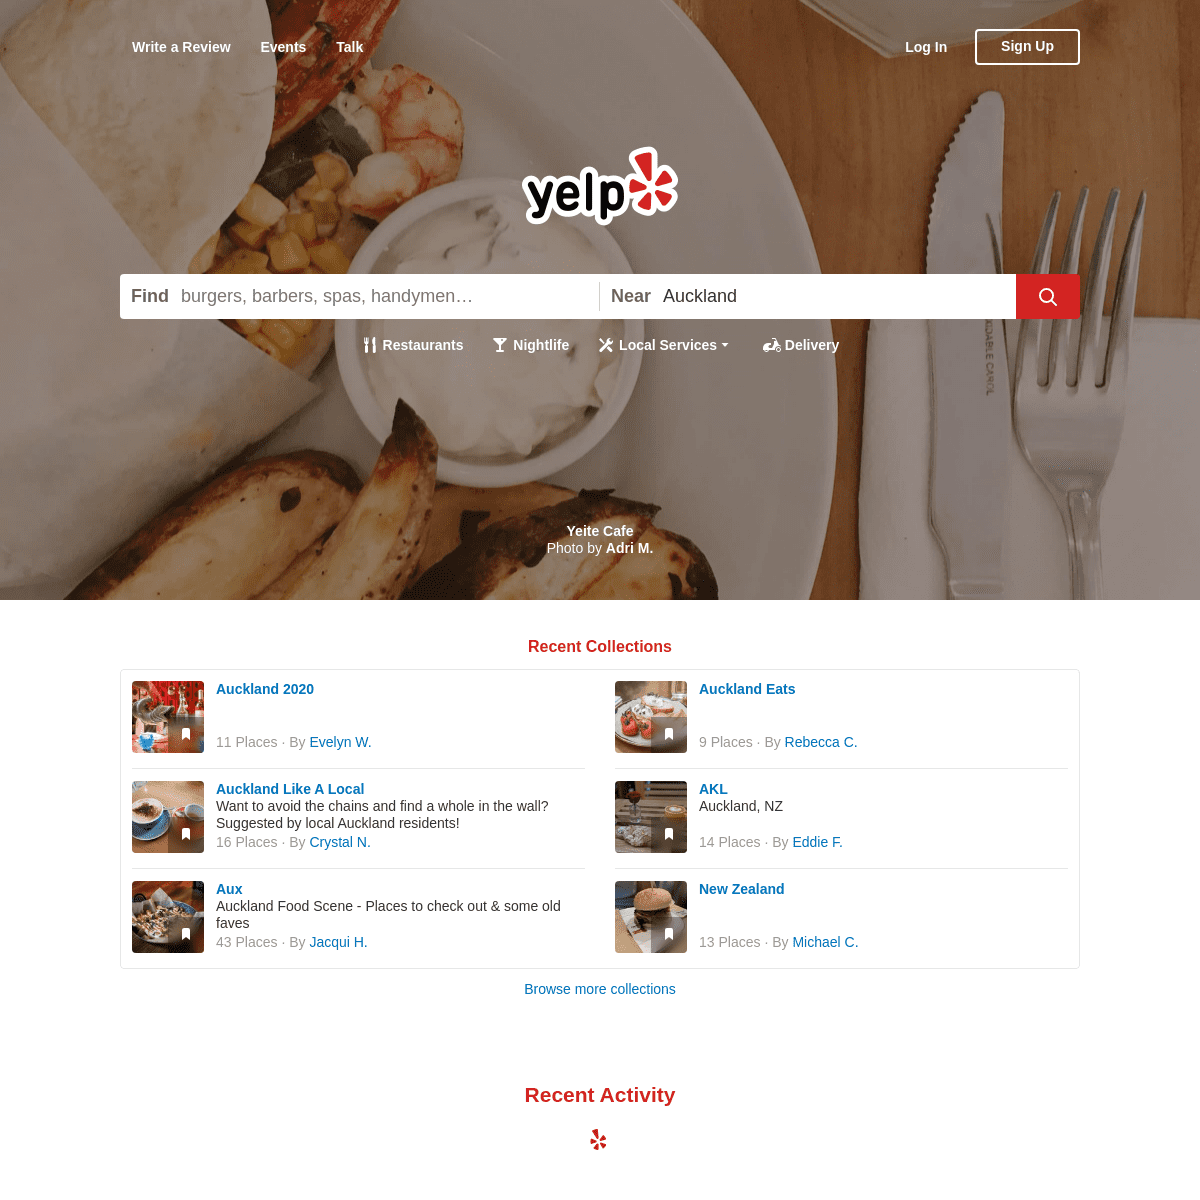 A complete backup of https://yelp.co.nz